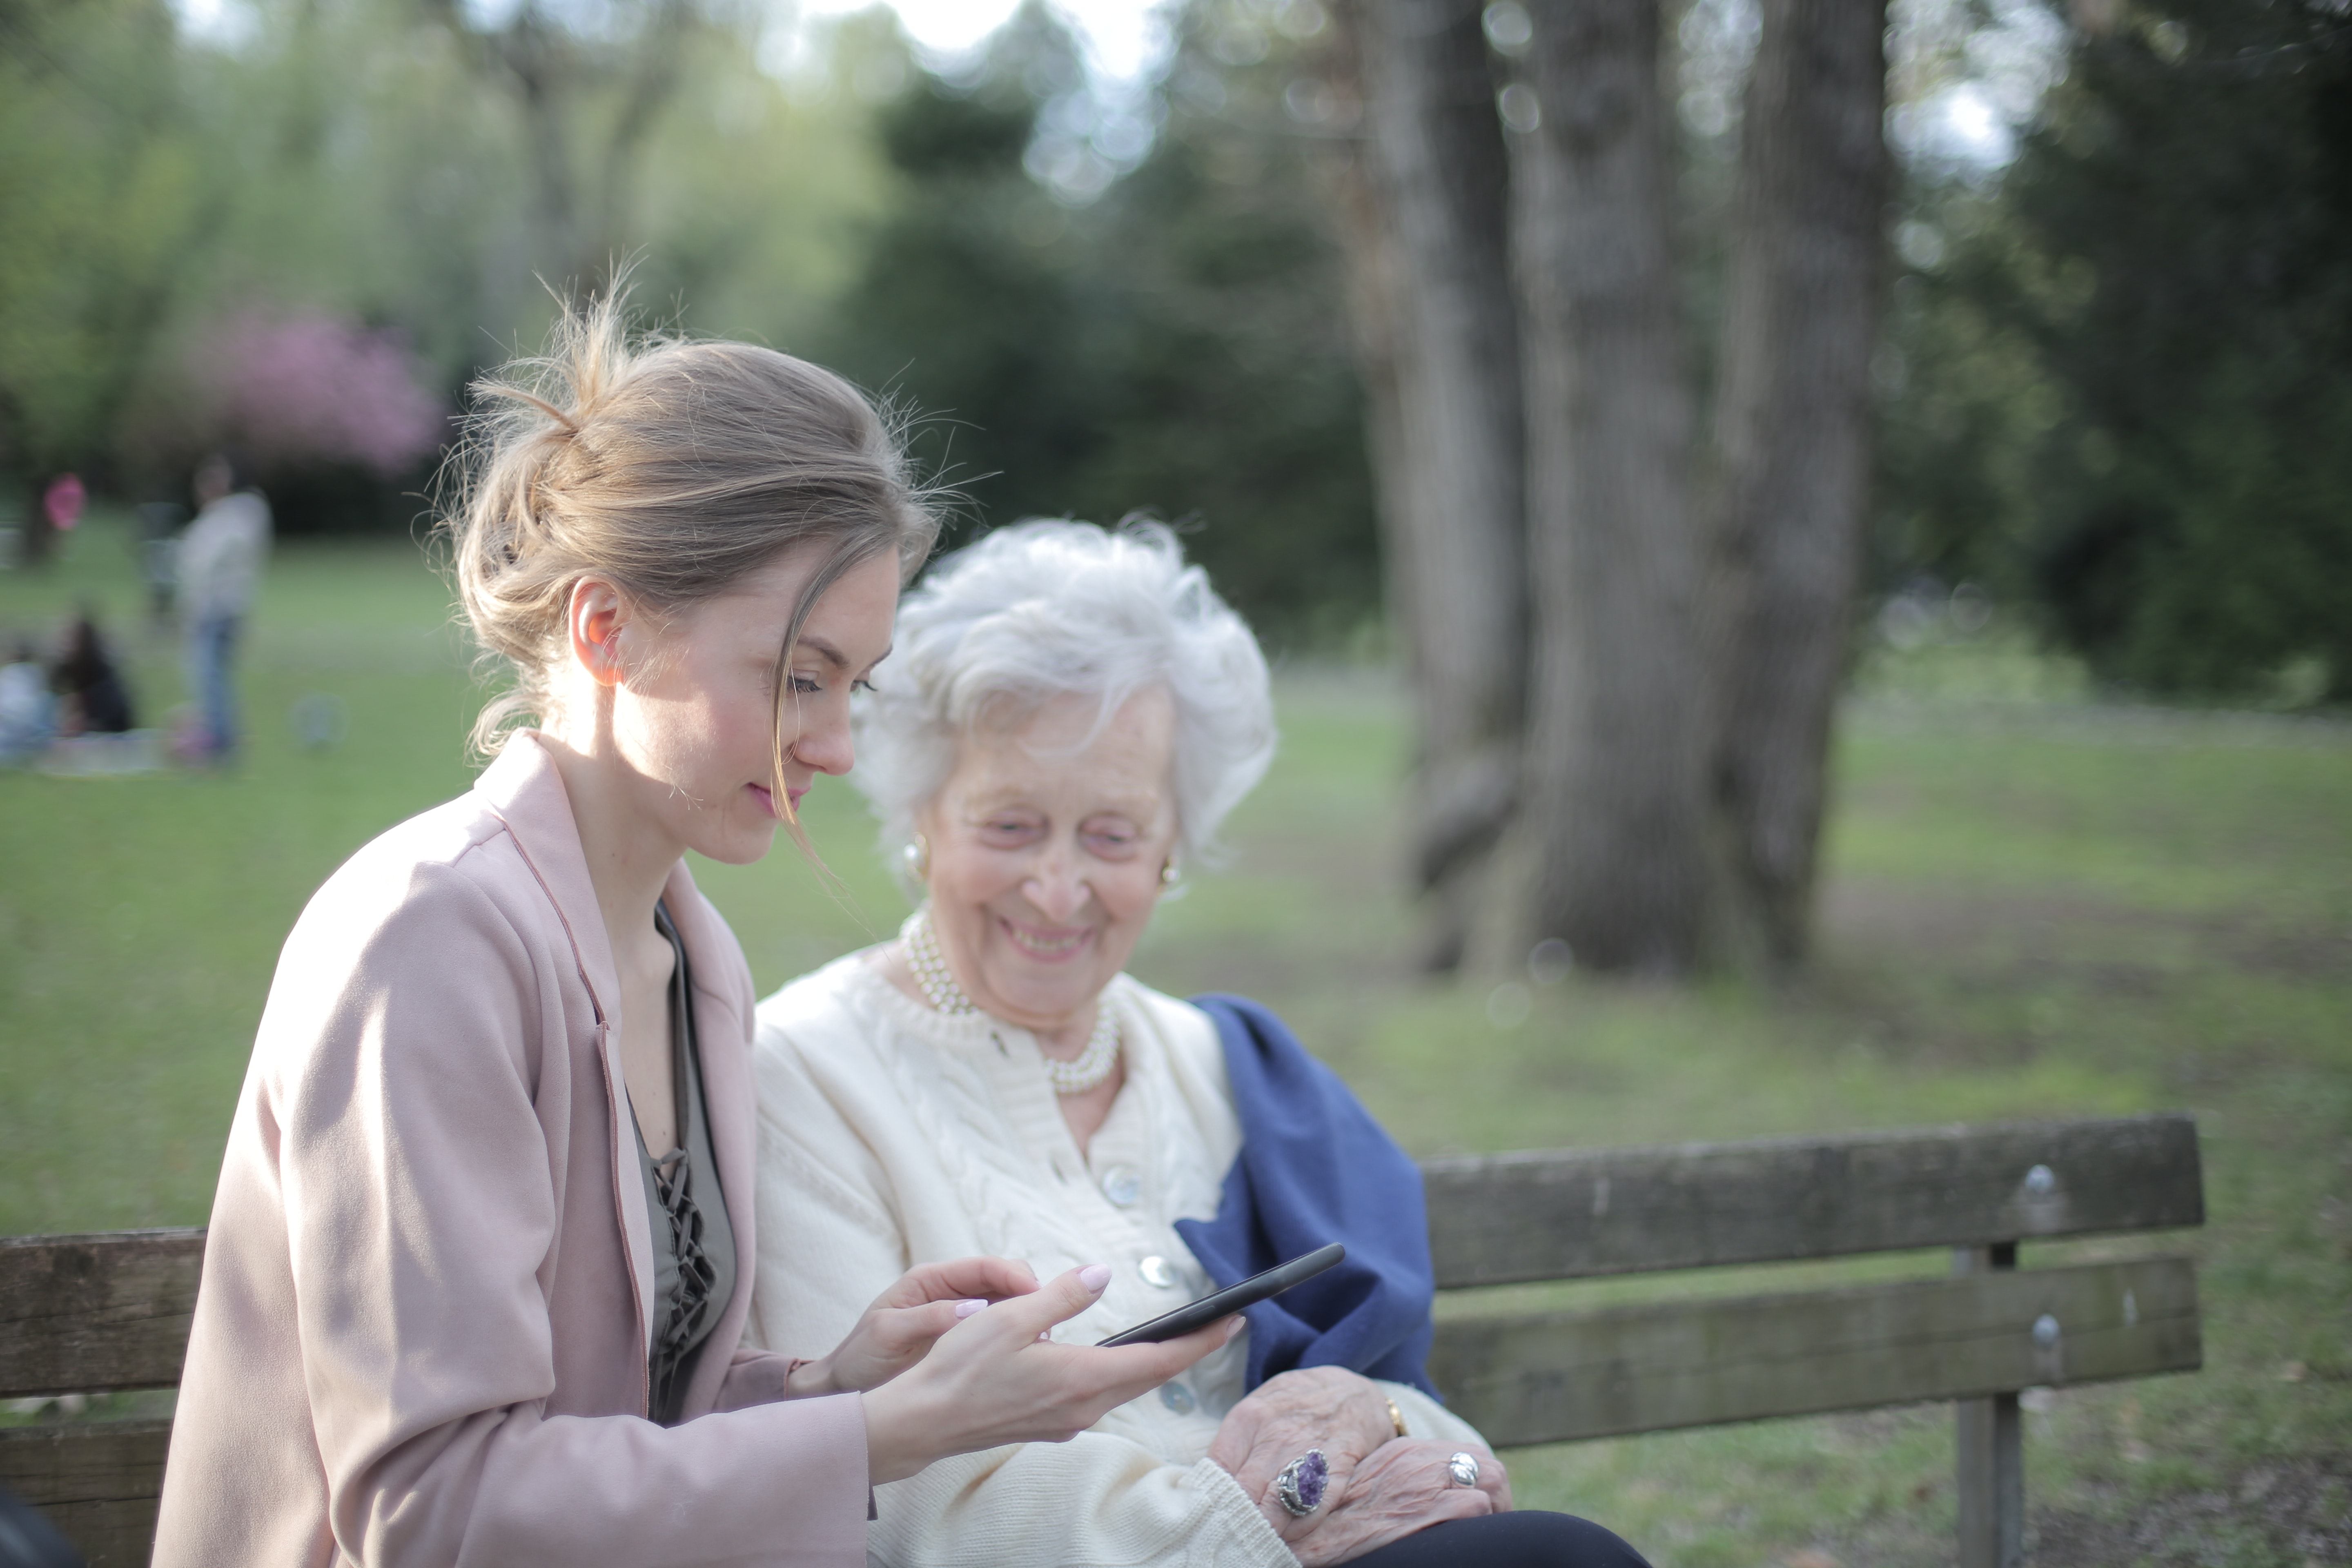 Caregiver in park with elderly patient showing her how to use smartphone.